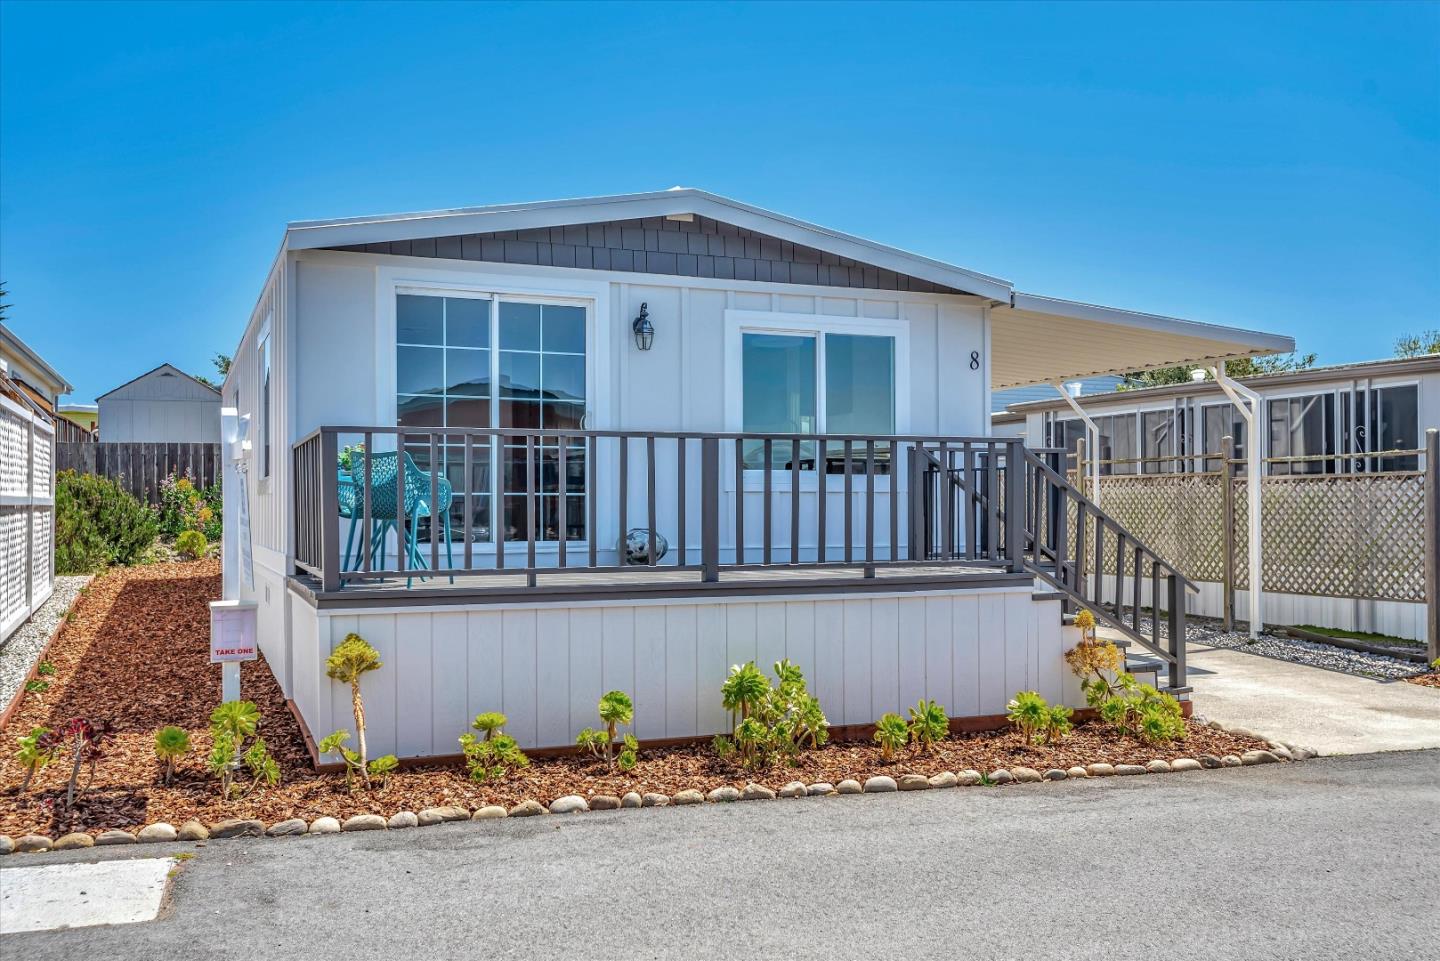 Photo of 8 Lighthouse Rd #8 in Half Moon Bay, CA